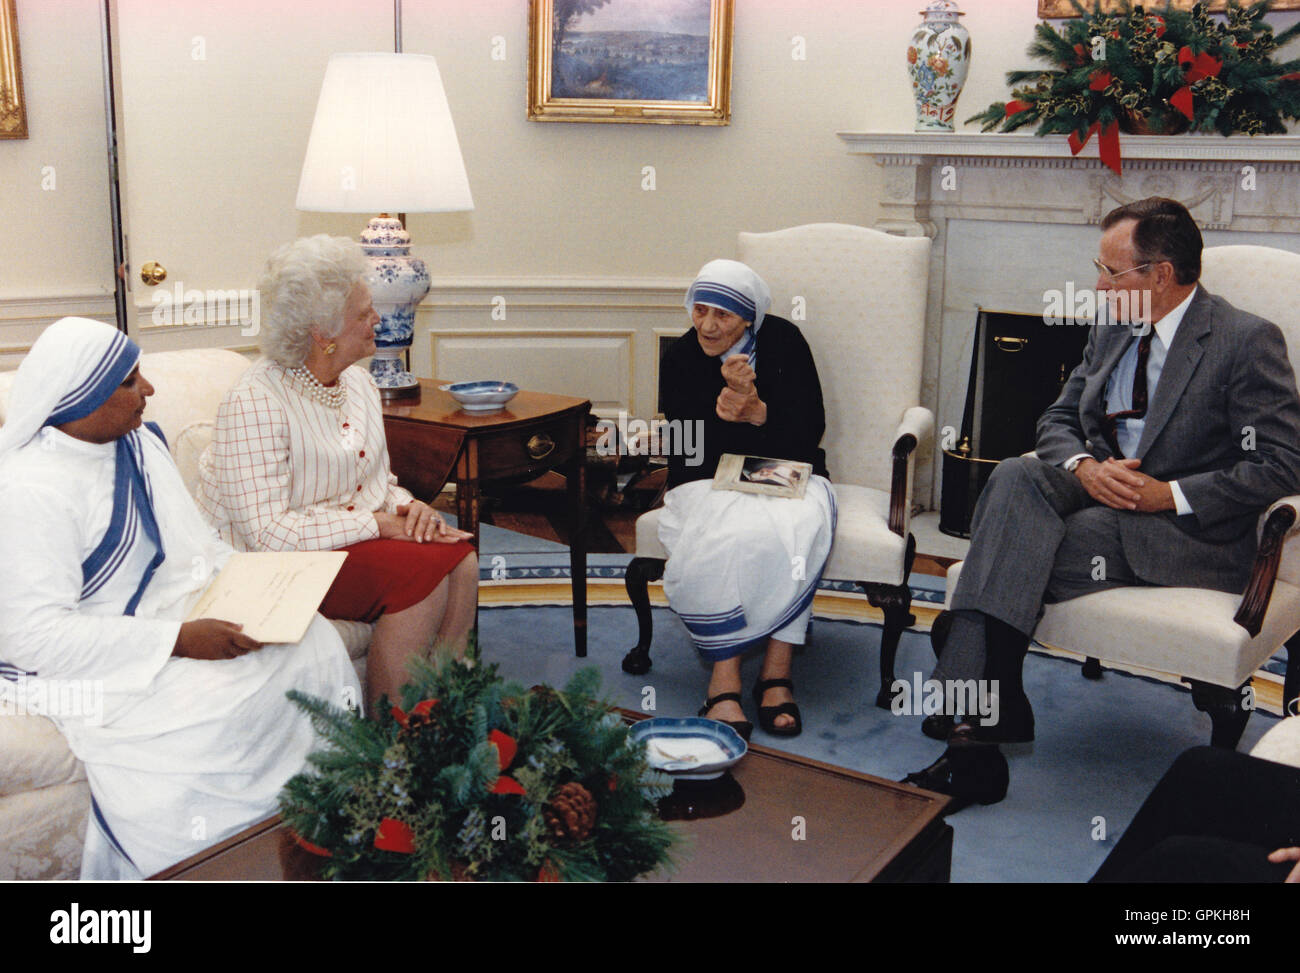 United States President George H.W. Bush, right, and first lady Barbara Bush, center left, meet with Mother Teresa, founder, Roman Catholic Missionaries of Charity, center right, in the Oval Office of the White House in Washington, D.C. on December 9, 1991. Mandatory Credit: Carol T. Powers / The White House via CNP - NO WIRE SERVICE - Stock Photo